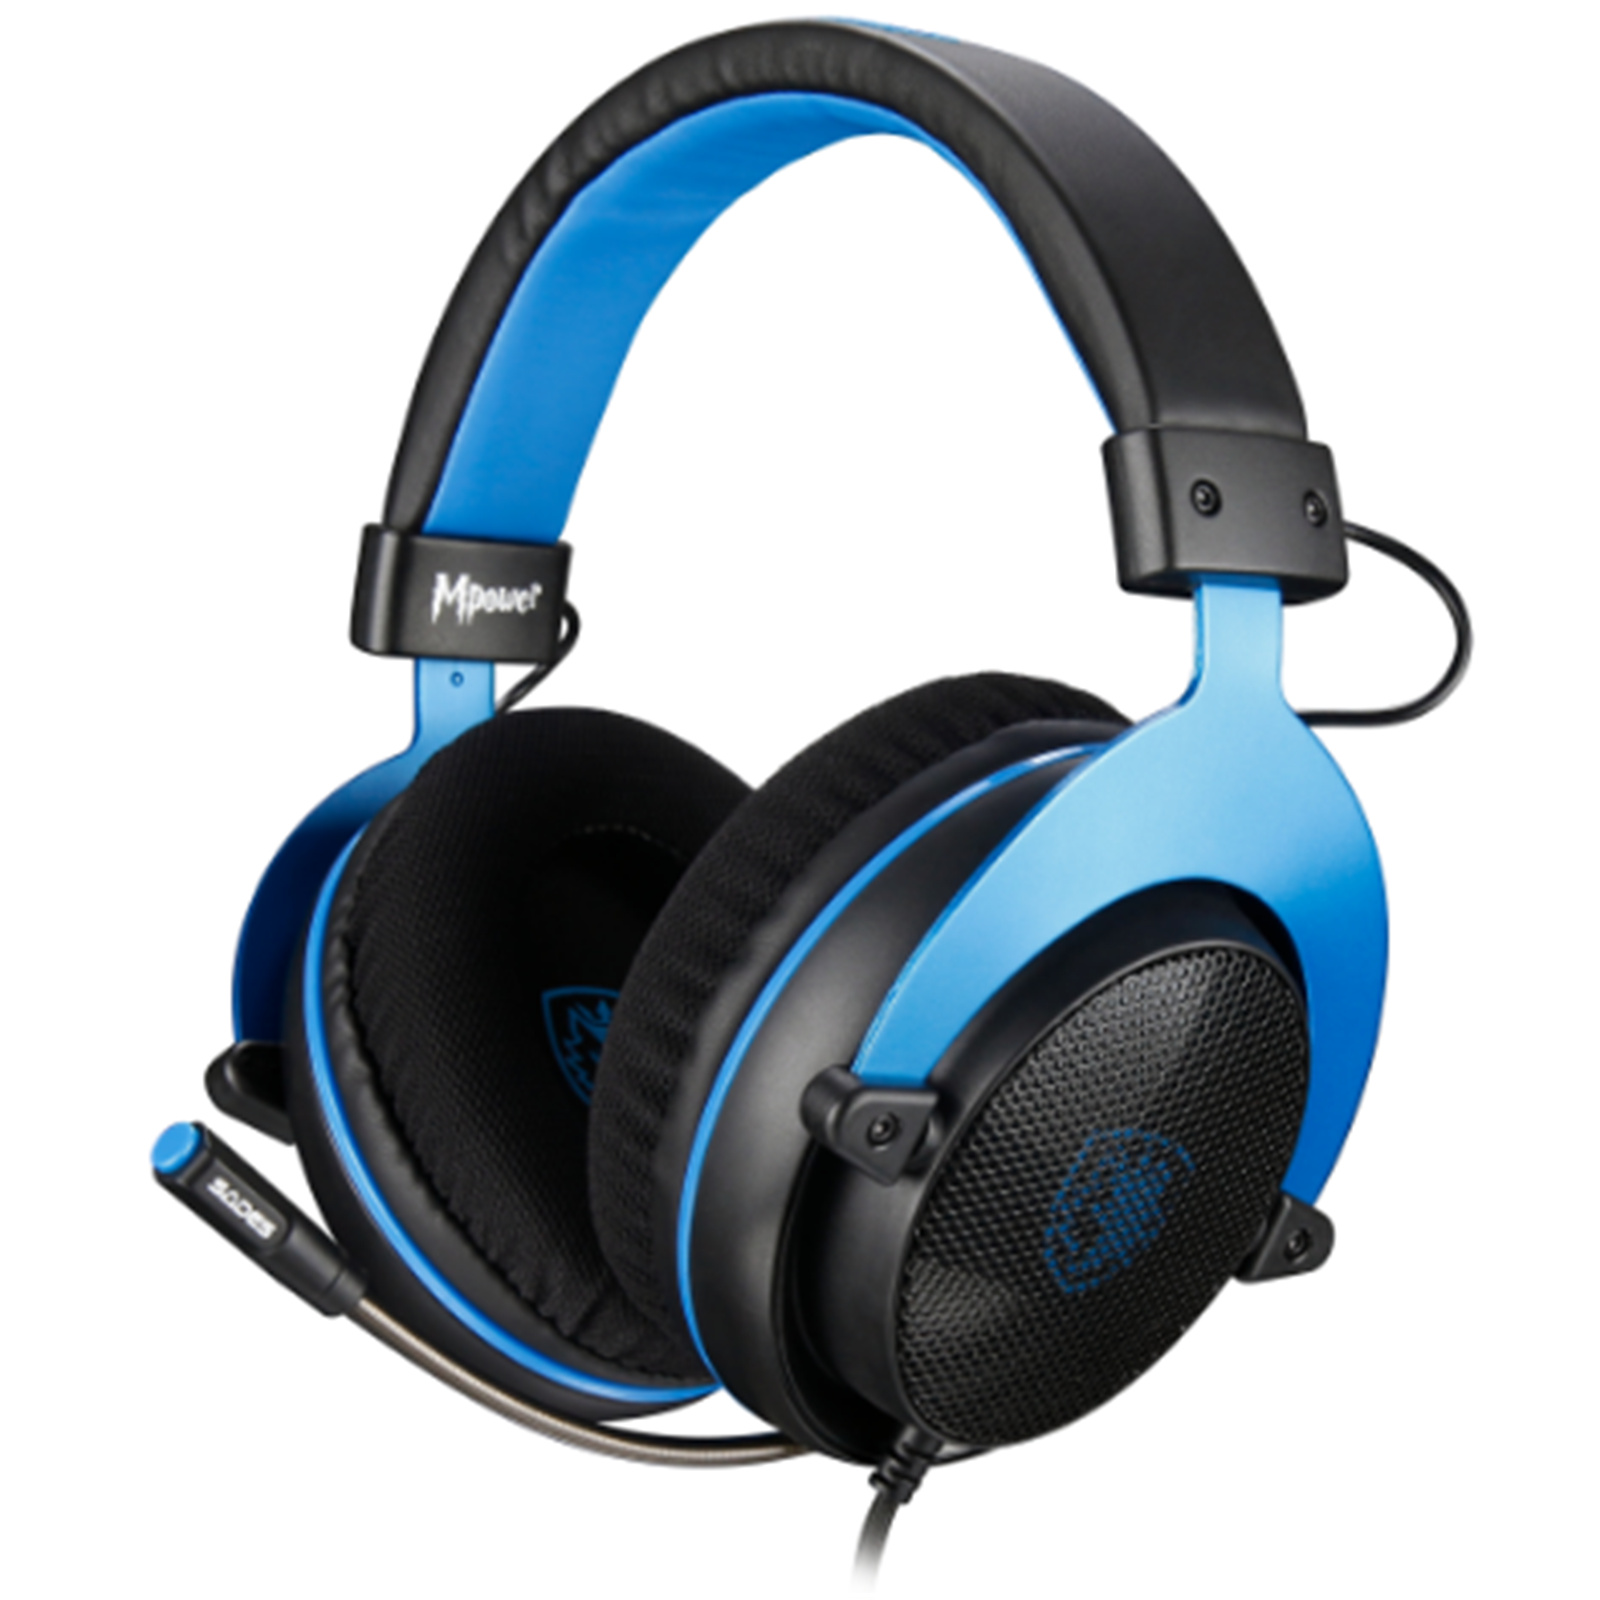 Buy the Sades M-Power - Gaming Headset Multi-platform compatibility (with  3.5... ( SMGH ) online - PBTech.com